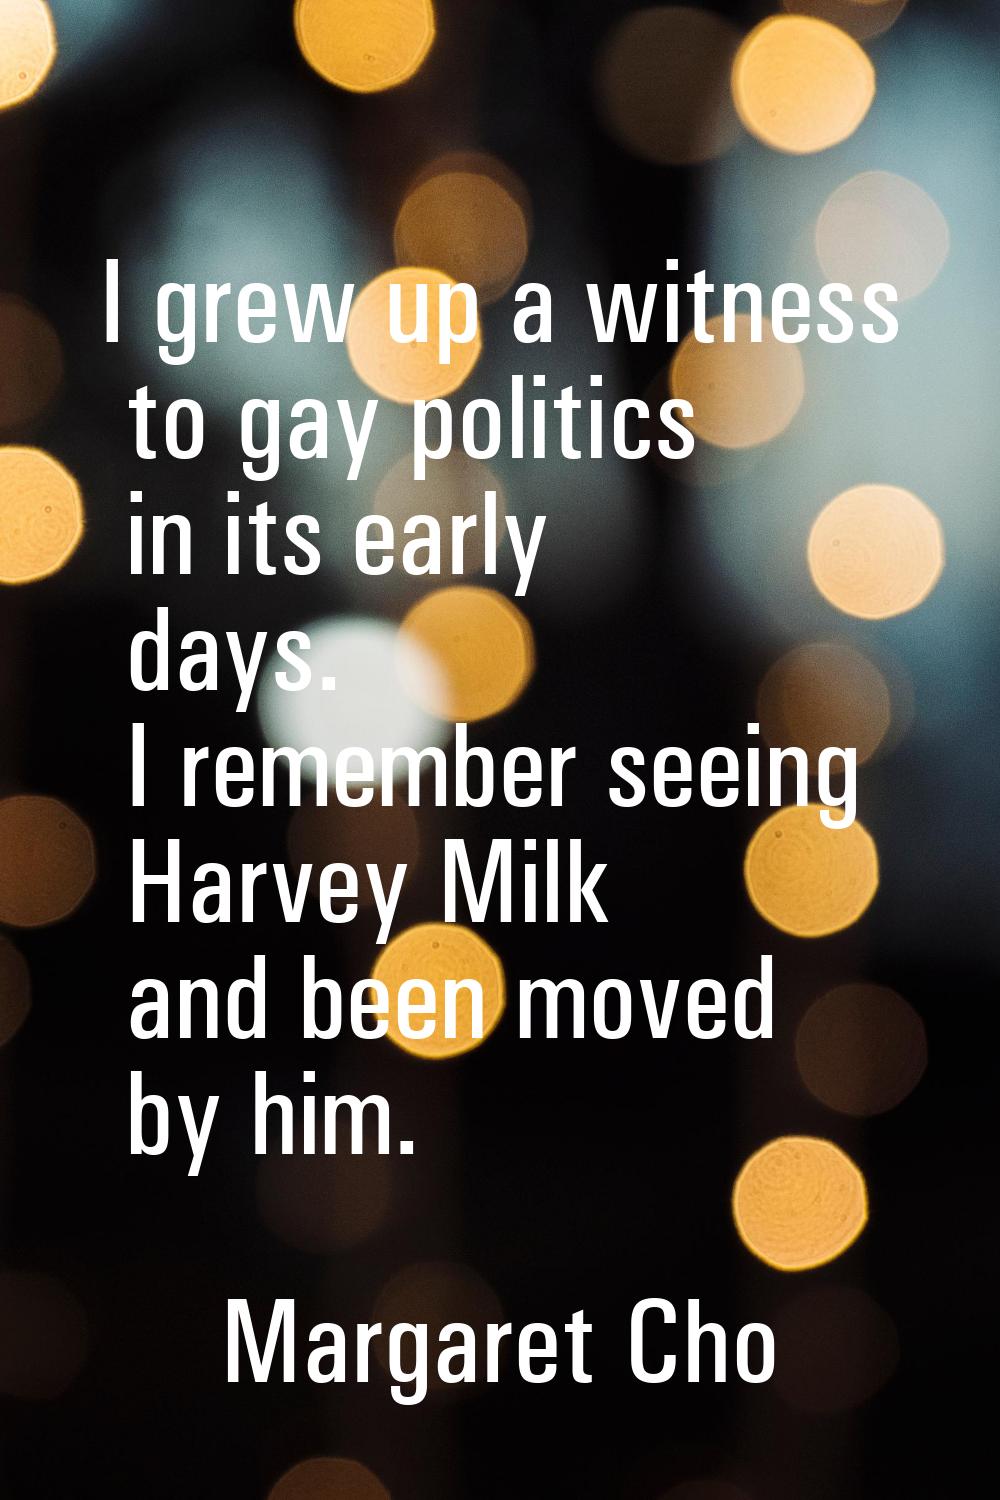 I grew up a witness to gay politics in its early days. I remember seeing Harvey Milk and been moved